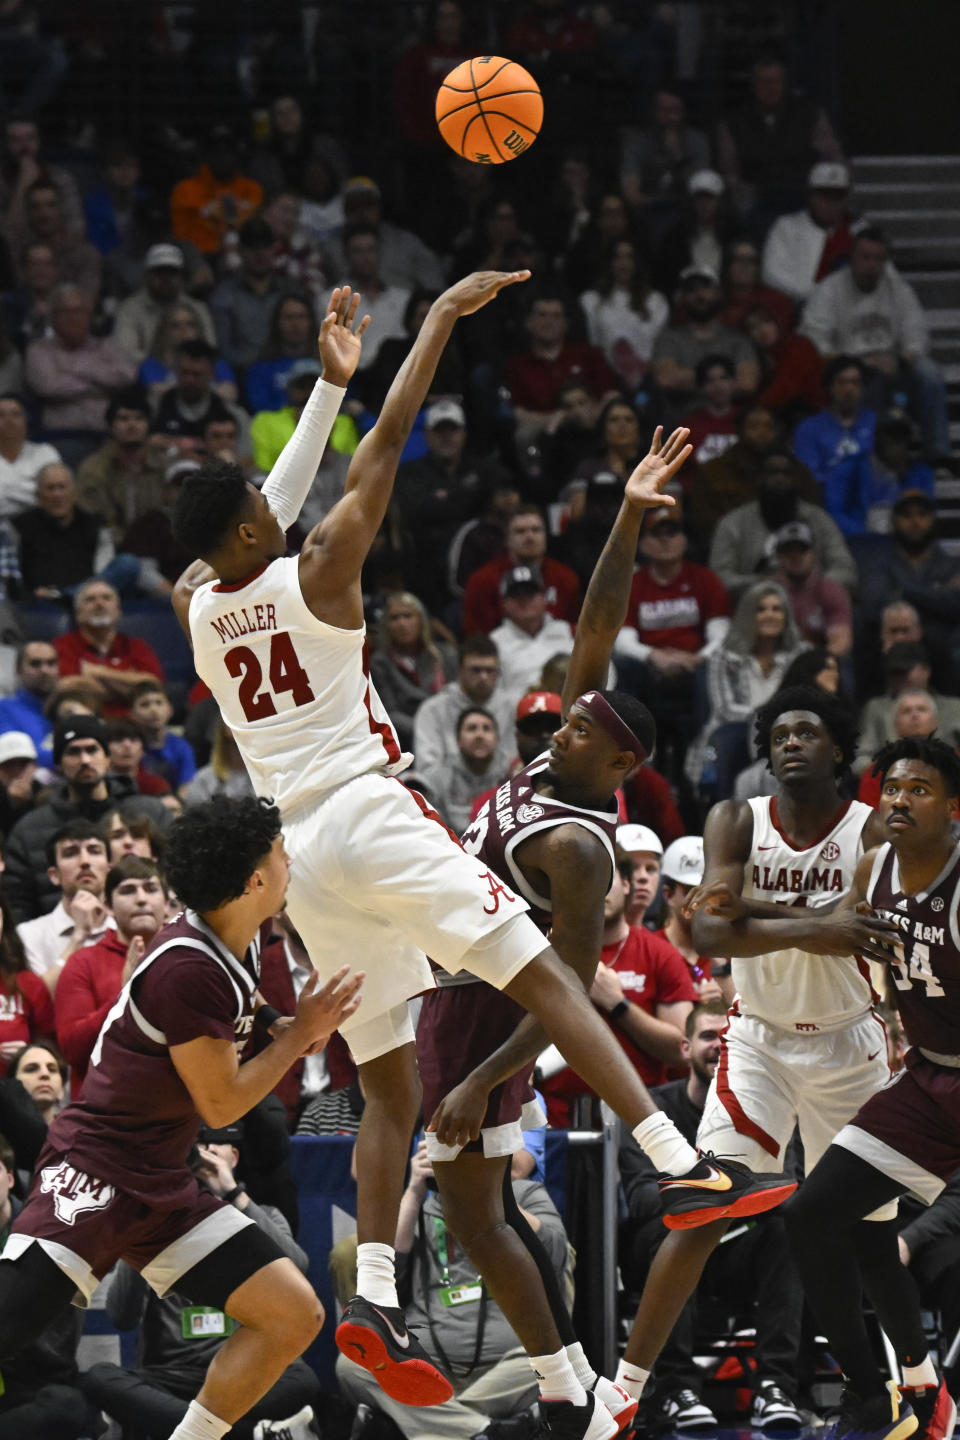 Alabama forward Brandon Miller shoots against Texas A&M during the second half of an NCAA college basketball game in the finals of the Southeastern Conference Tournament, Sunday, March 12, 2023, in Nashville, Tenn. (AP Photo/John Amis)